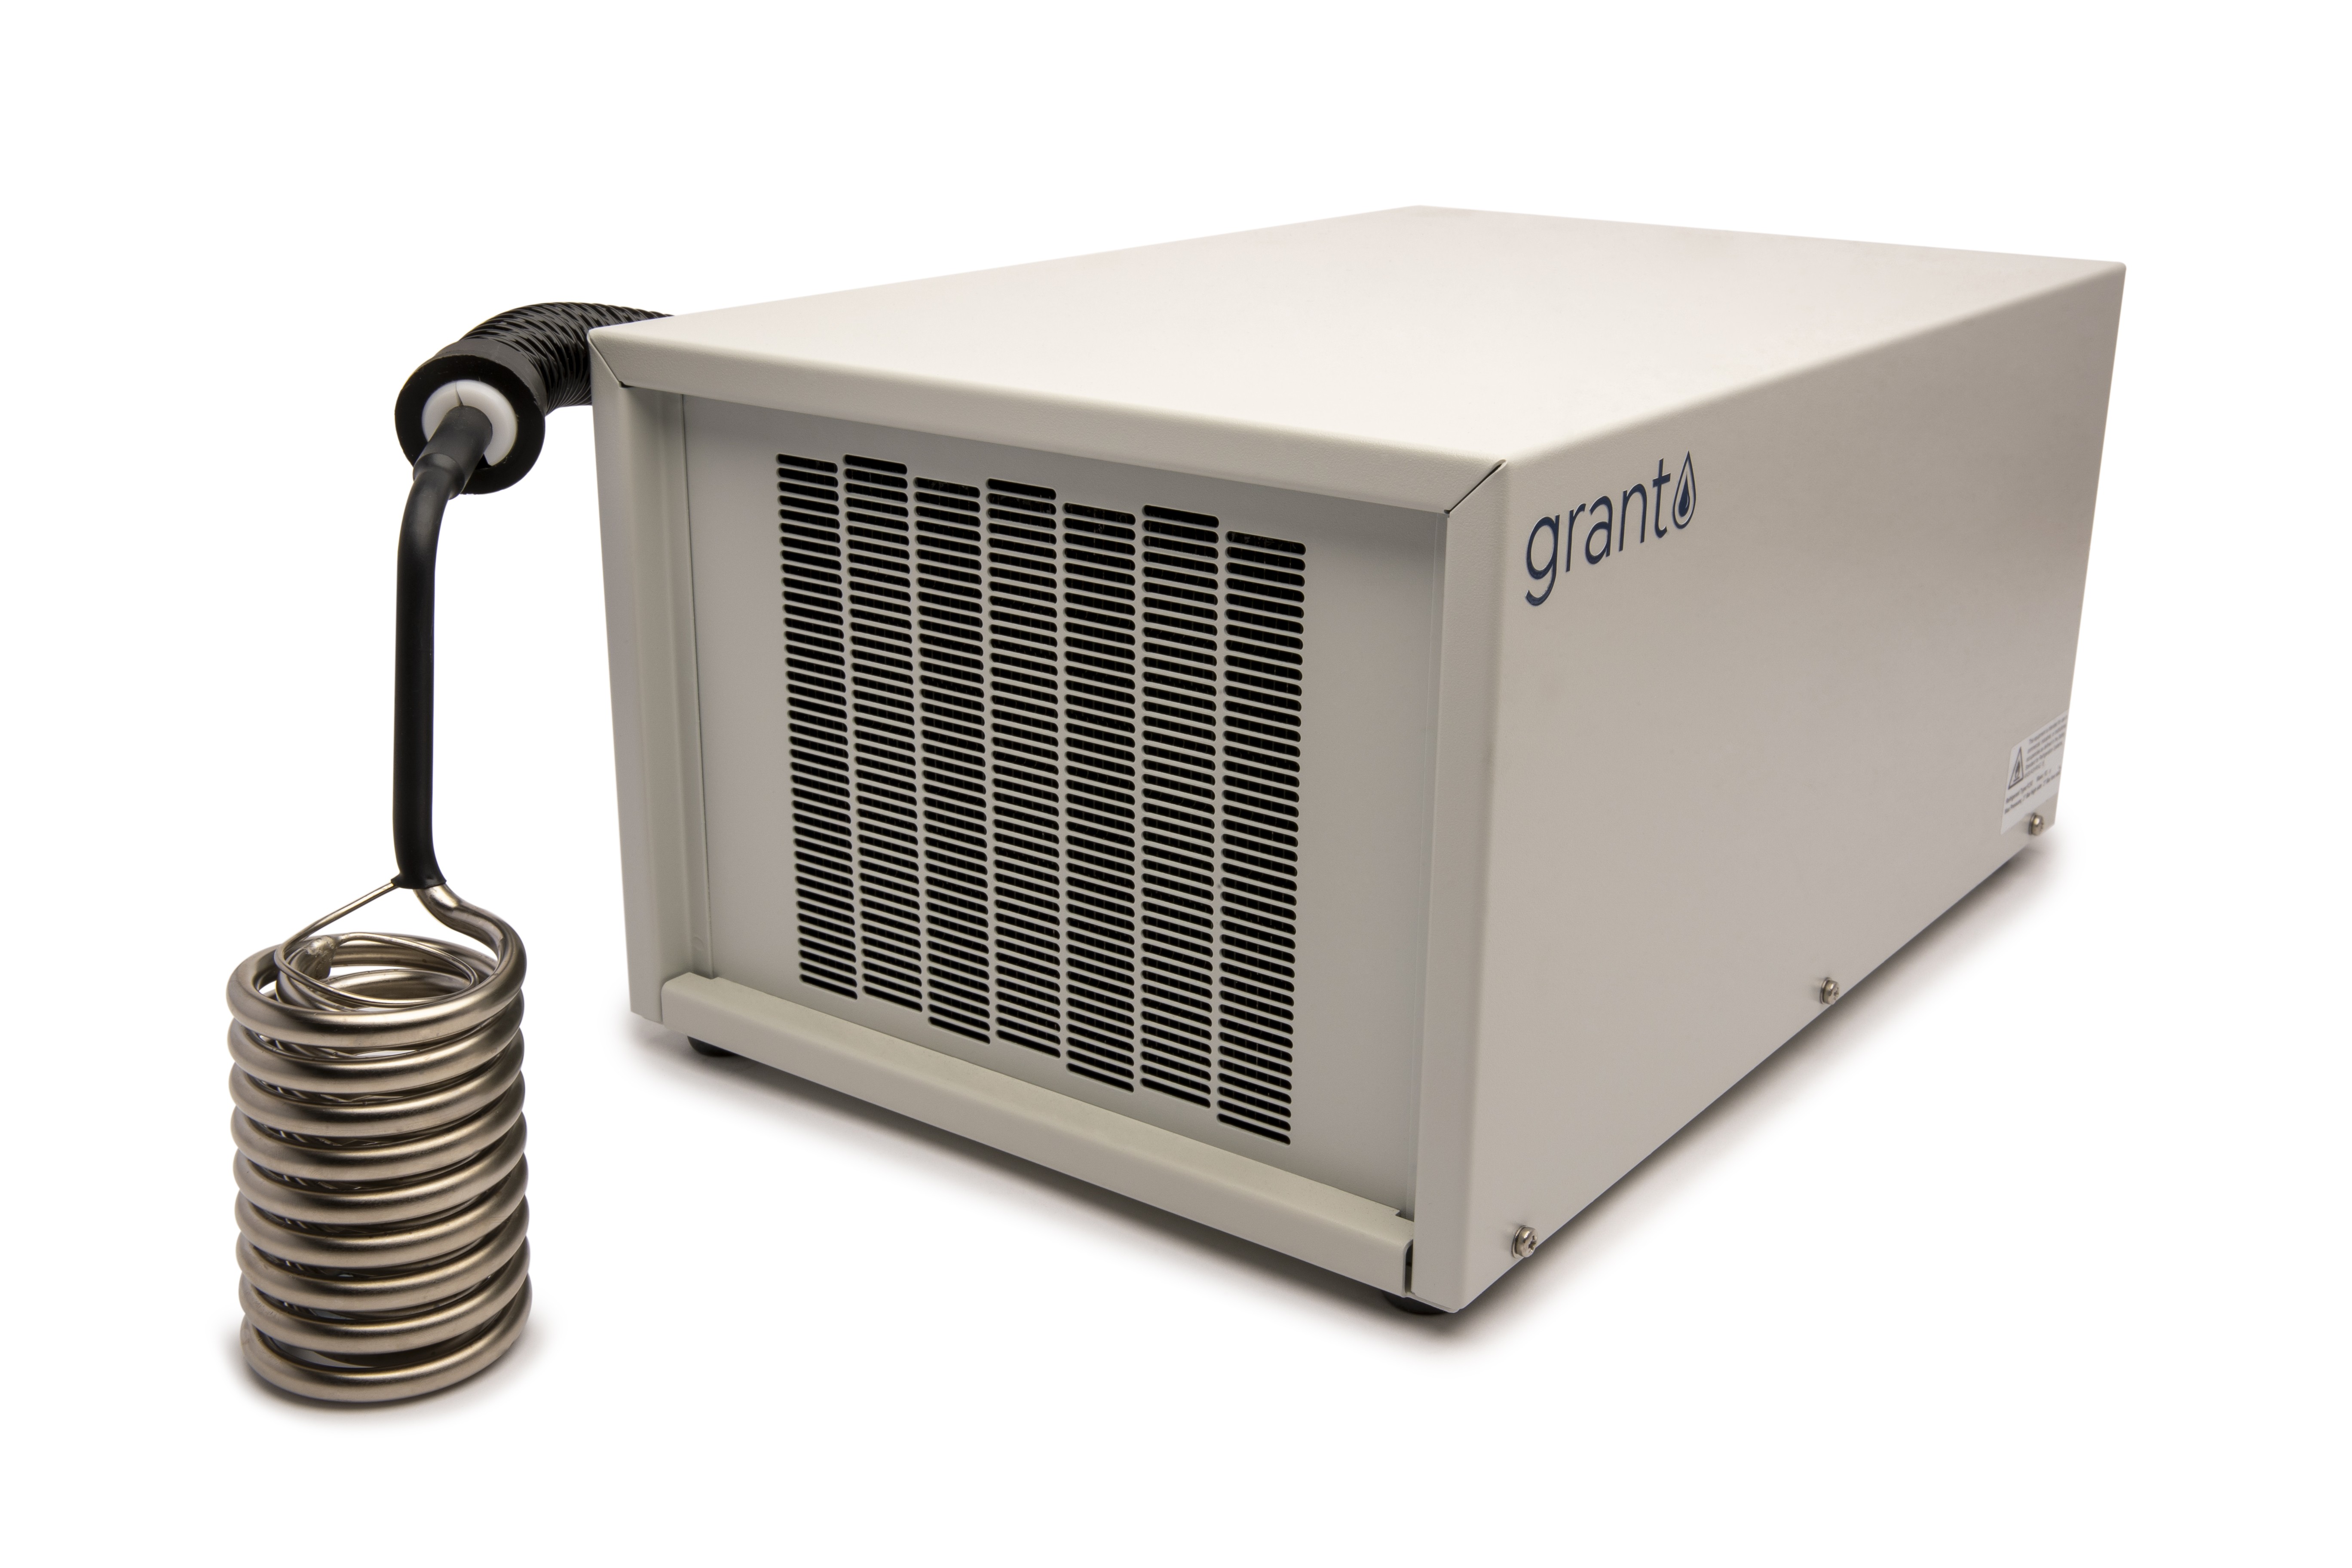 C2GR - Grant Instruments CG Refrigerated Immersion Coolers